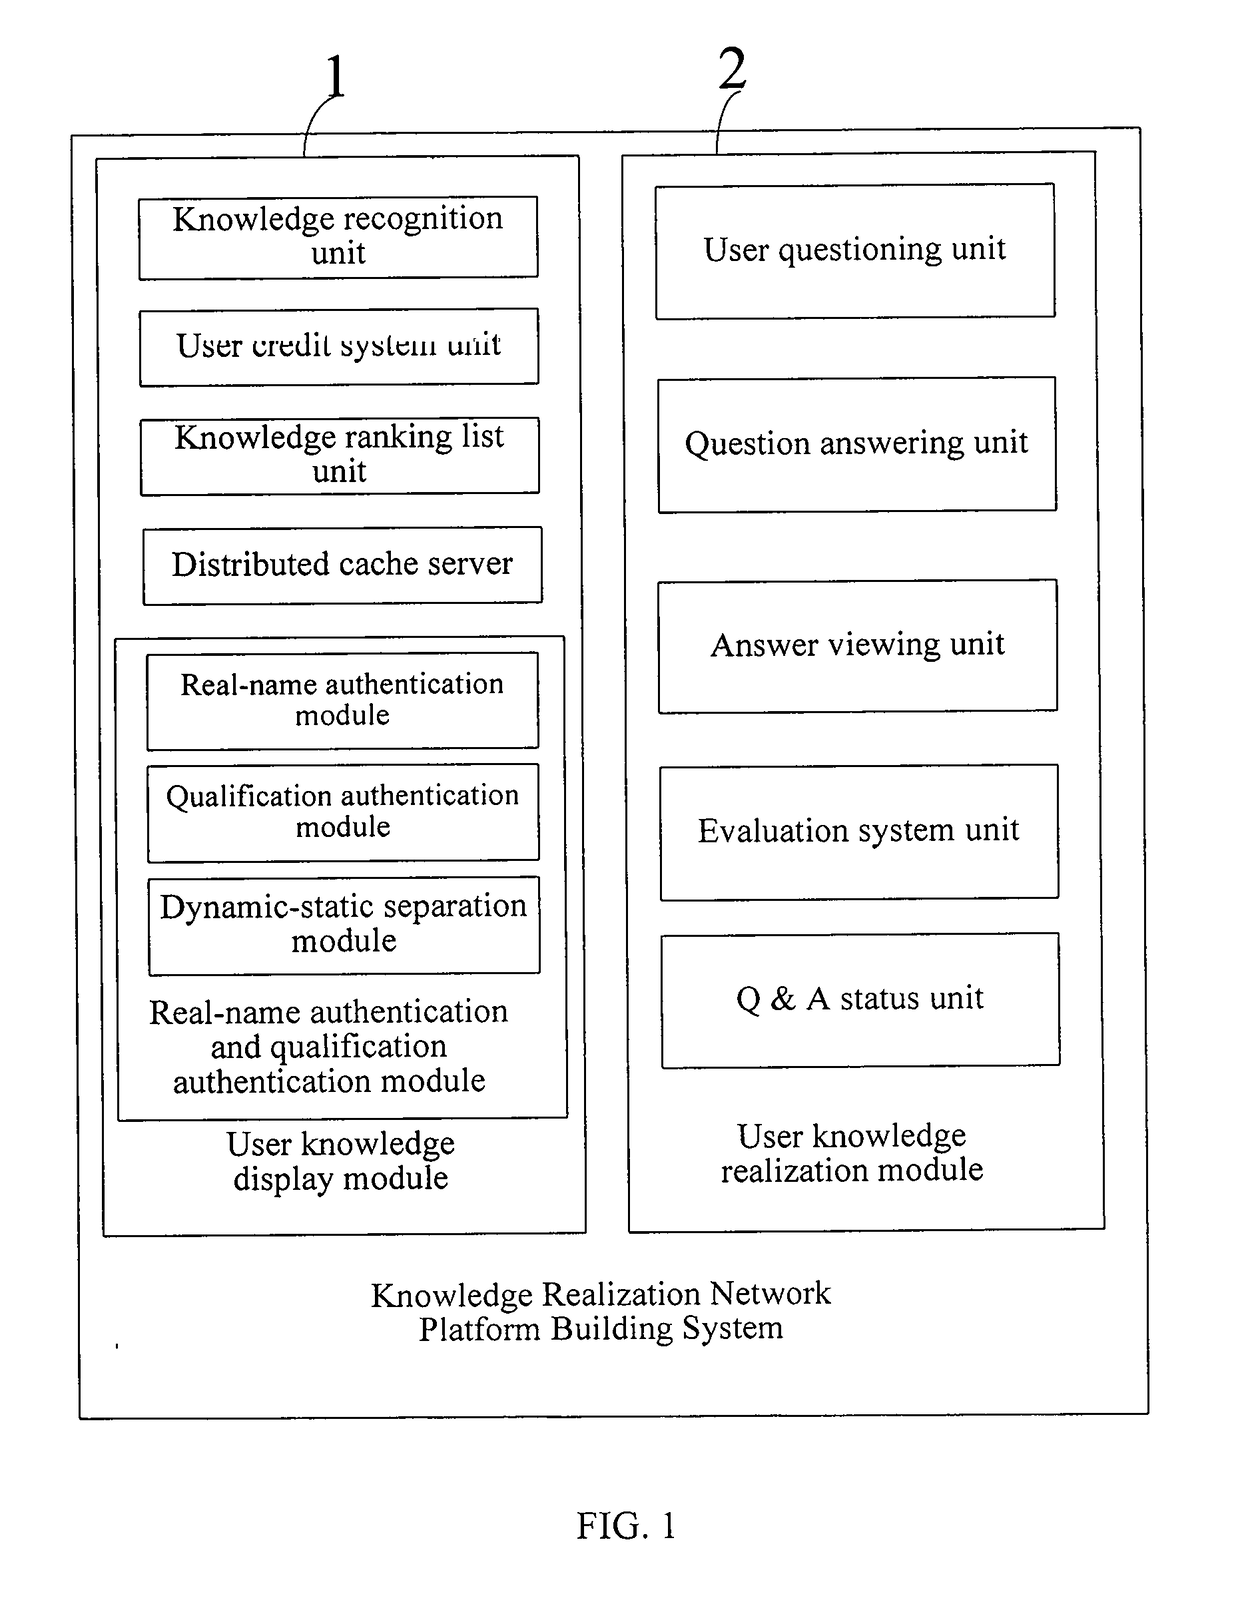 System and Method for Building a Network Platform of Knowledge Value-Realization